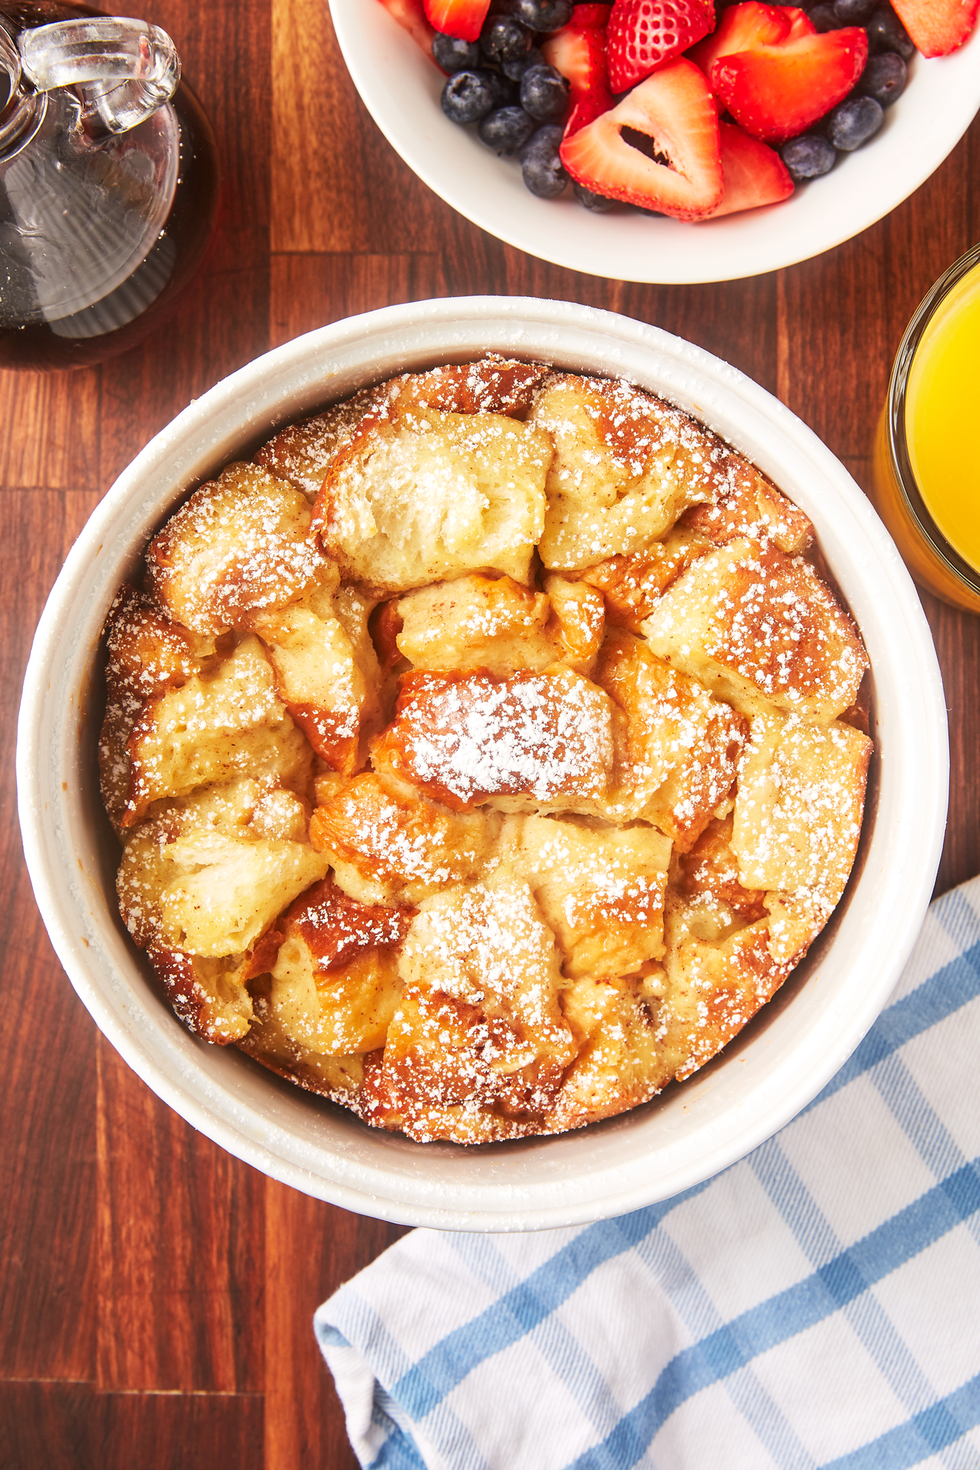 https://hips.hearstapps.com/hmg-prod/images/190502-instant-pot-french-toast-vertical-1-1557947757.png?crop=0.9997369113391213xw:1xh;center,top&resize=980:*